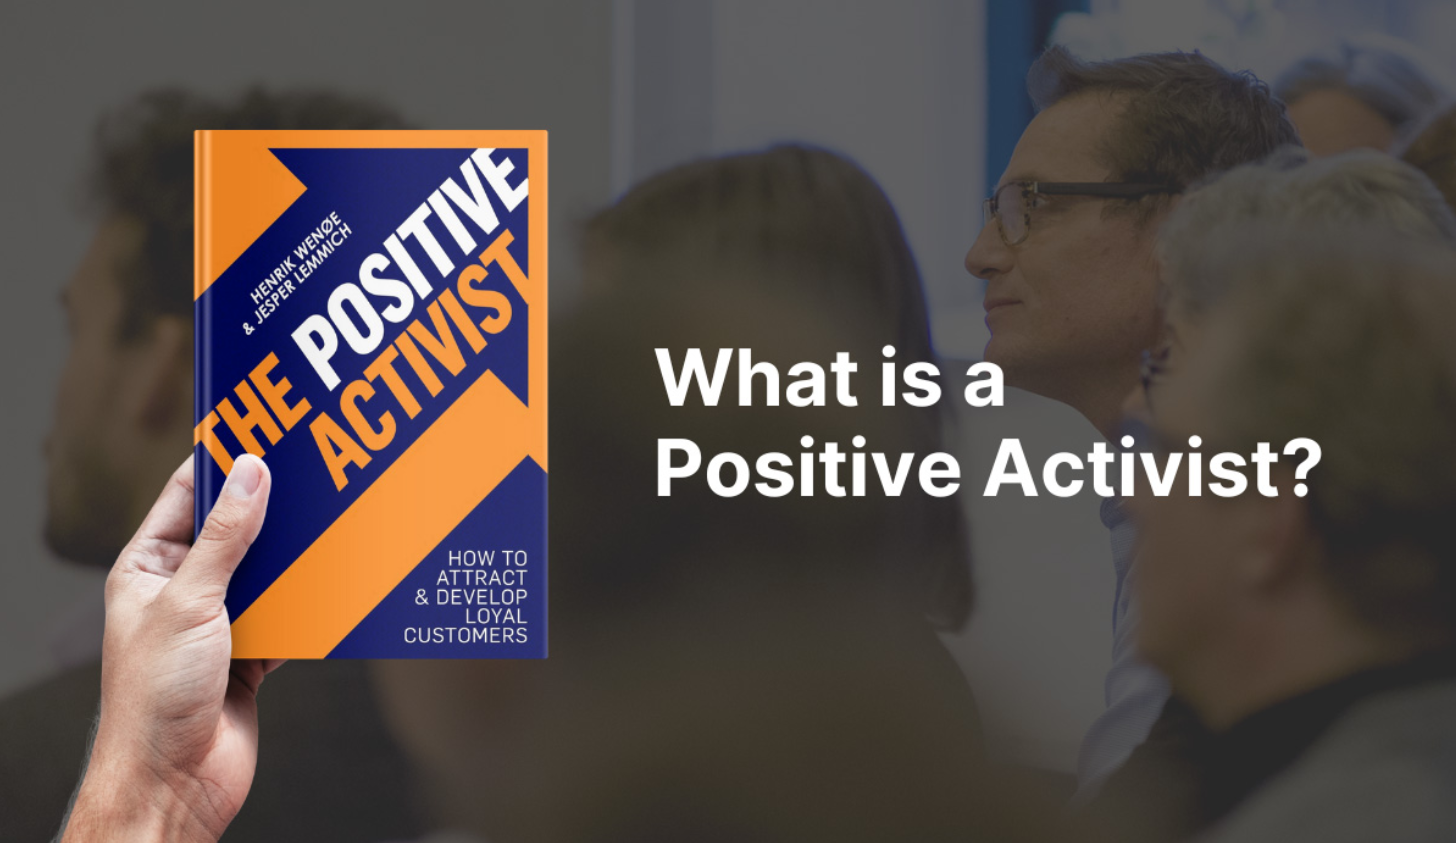 How to attract and develop loyal and satisfied customers - The Positive activist - Webinar